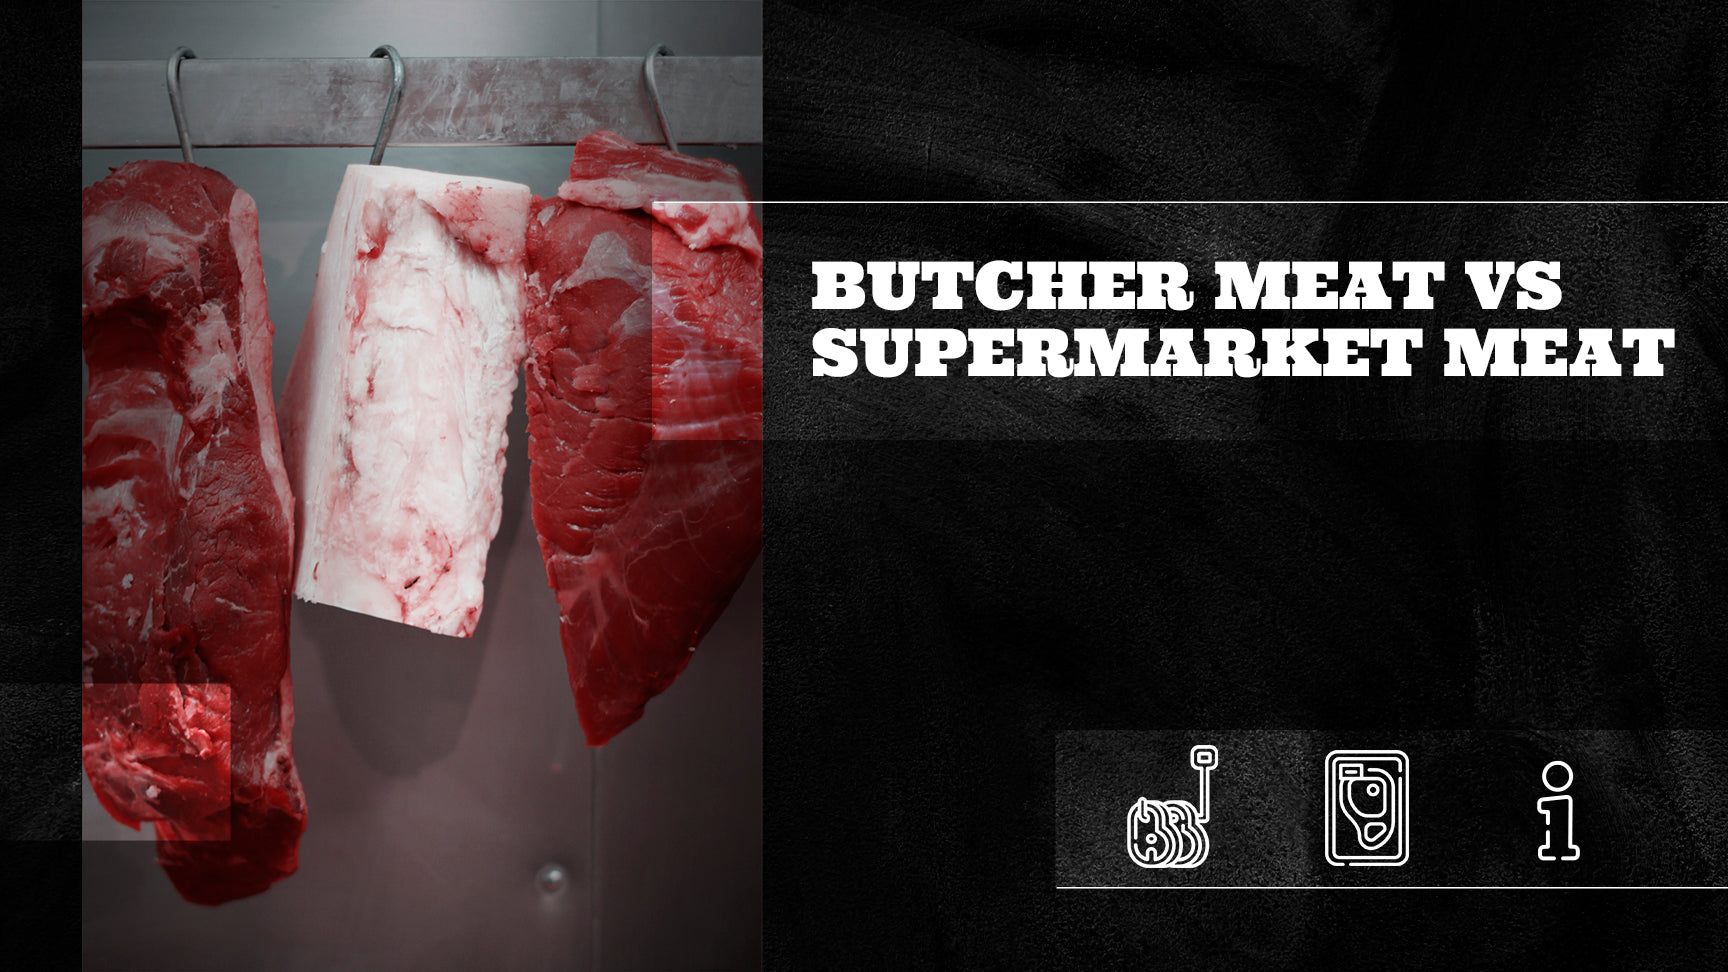 Get Fresh Meat: Buy Quality Meats at Frank's Butcher Shop